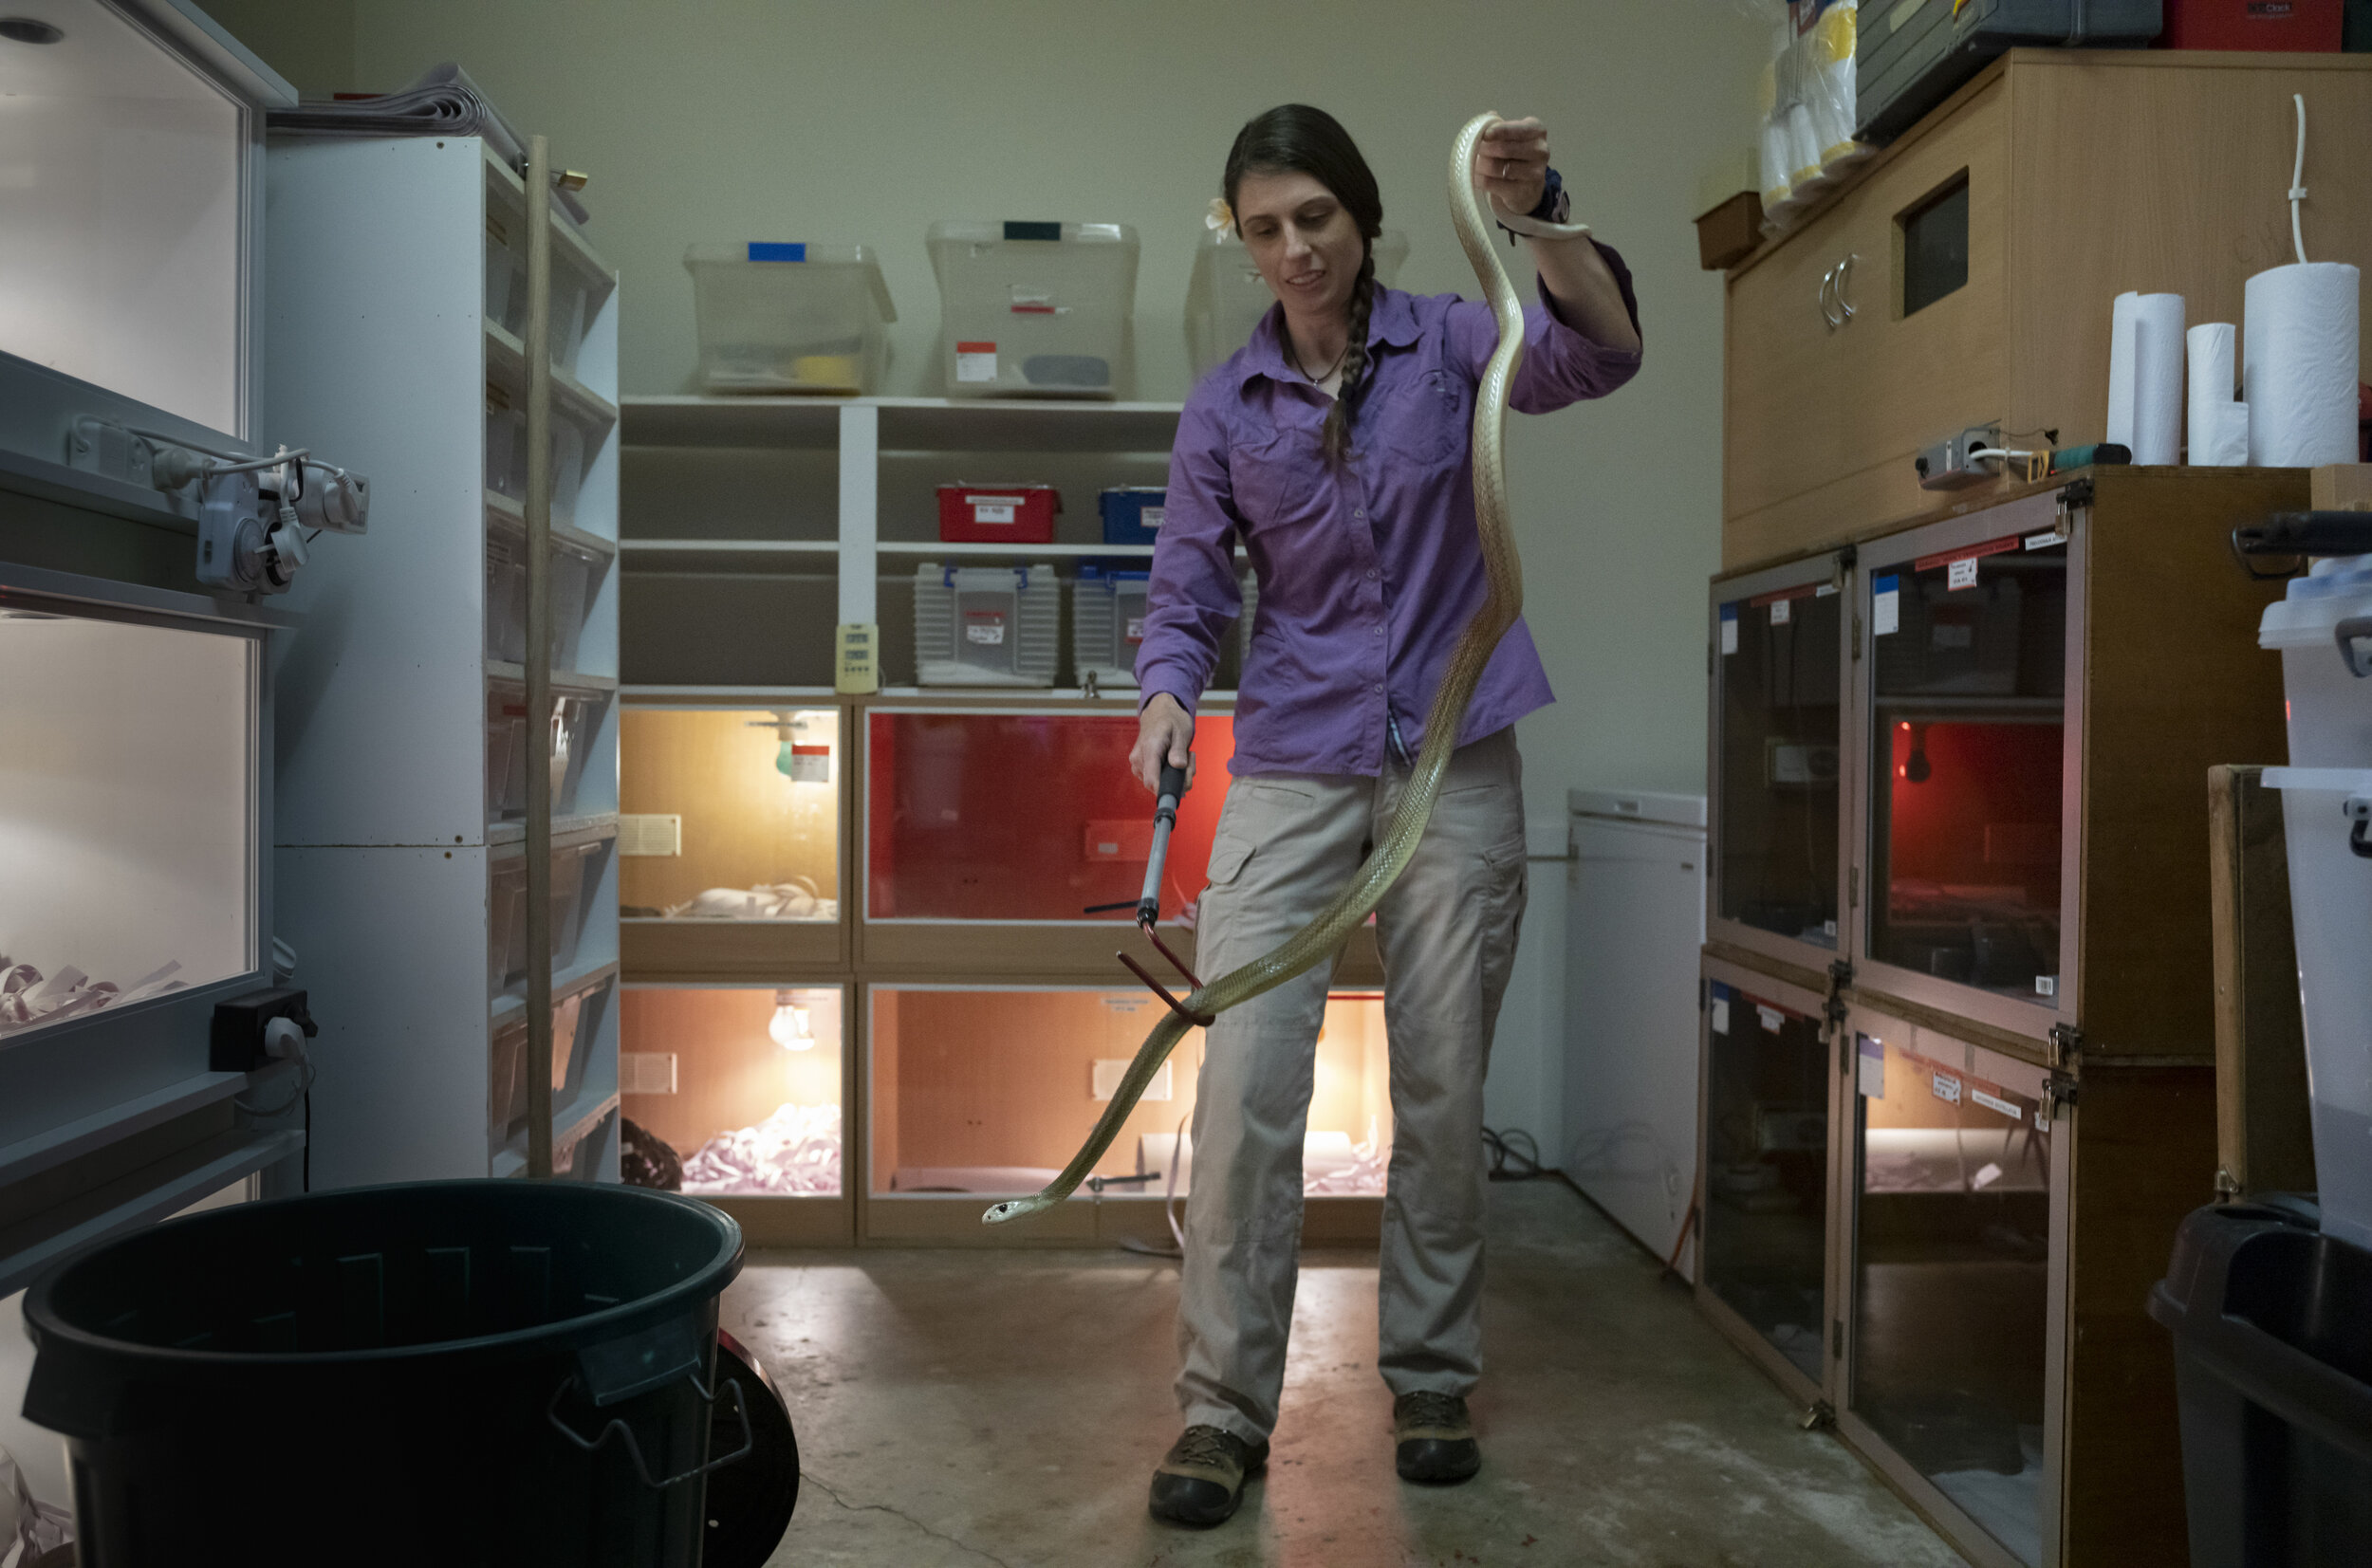  Christina Zdenek, a postdoctoral research fellow at Gehrman Labs University of Qld.Christina is photographed at home in Brisbane where she keeps some of Australias' most venomous snakes stored in her garage. Christina is moving a Coastal Taipan (Oxy